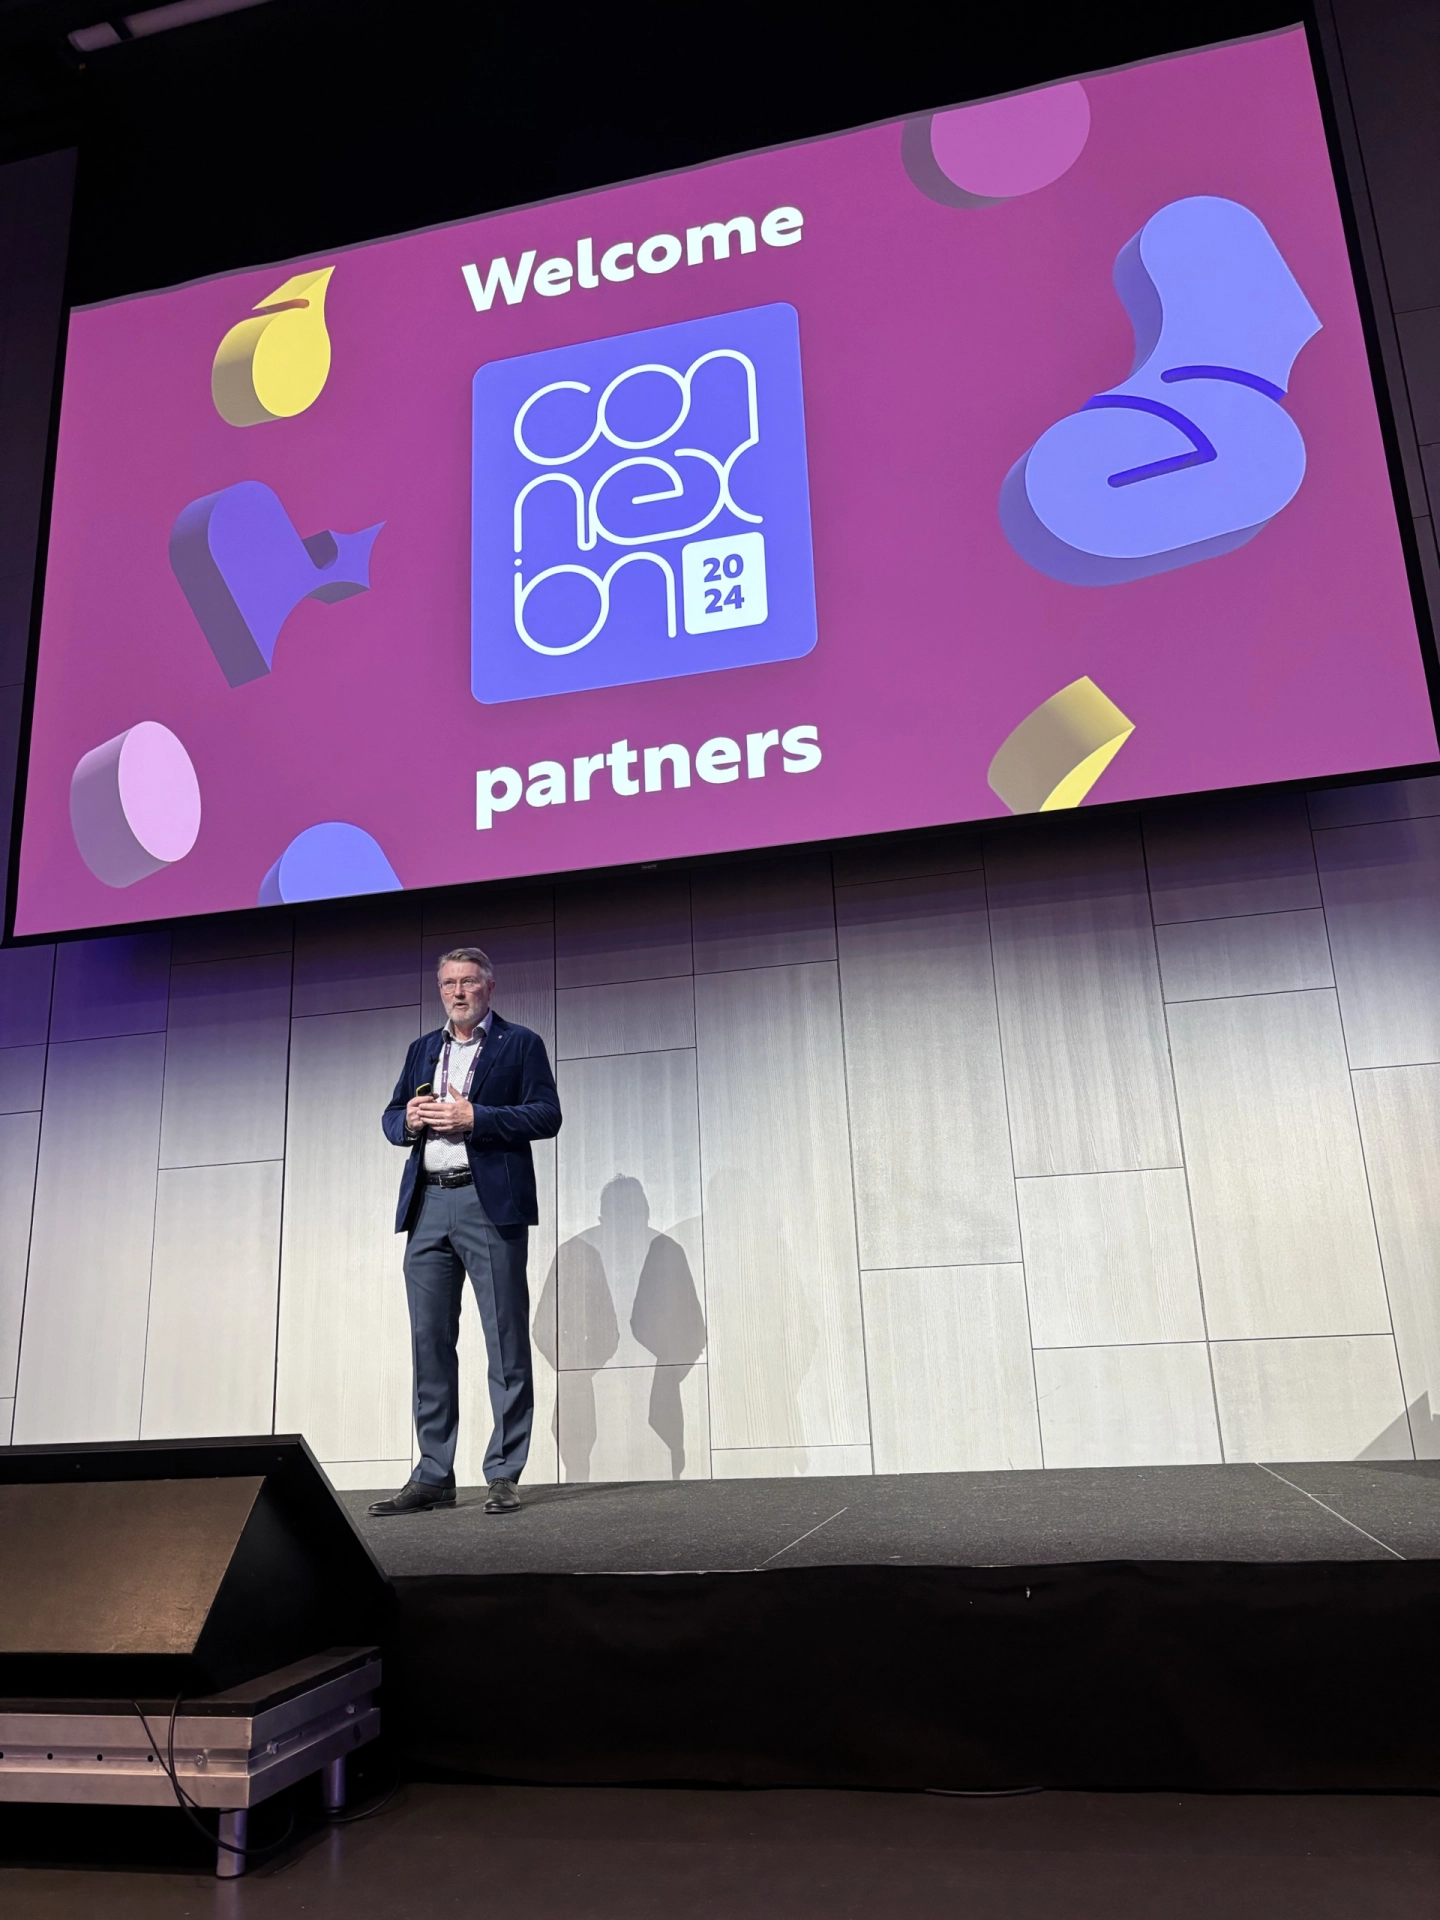 Kristjan Johannsson, General Manager of LS Retail welcomes all partners on ConneXion Partner Day